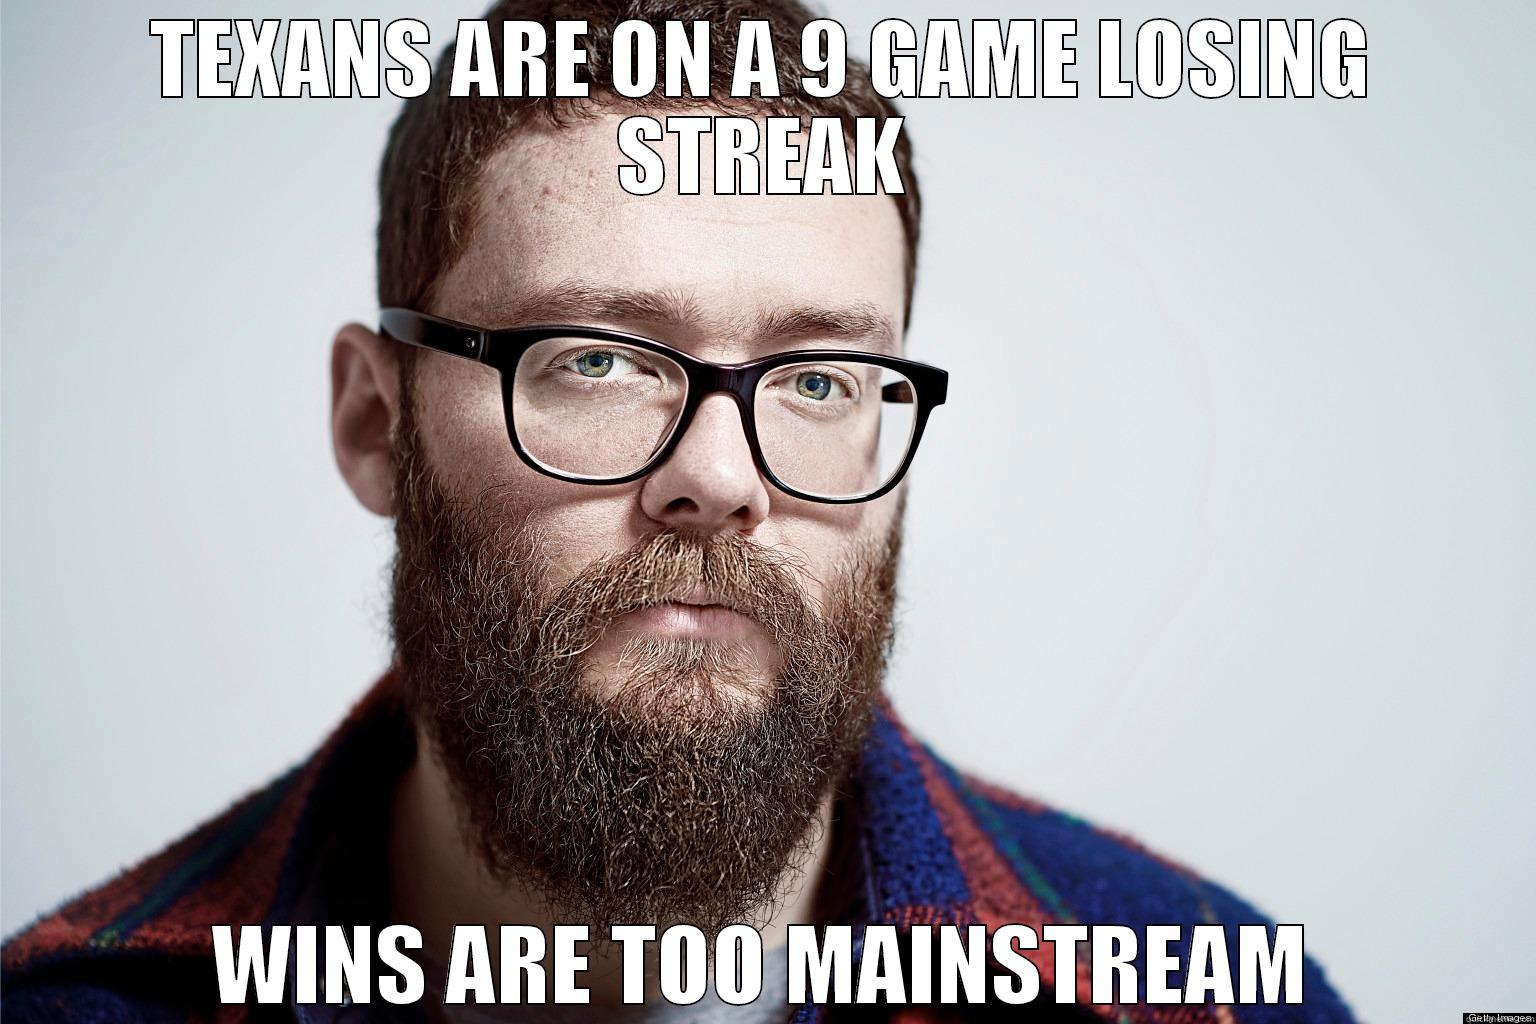 houston texans hipster - TEXANS ARE ON A 9 GAME LOSING STREAK WINS ARE TOO MAINSTREAM Misc